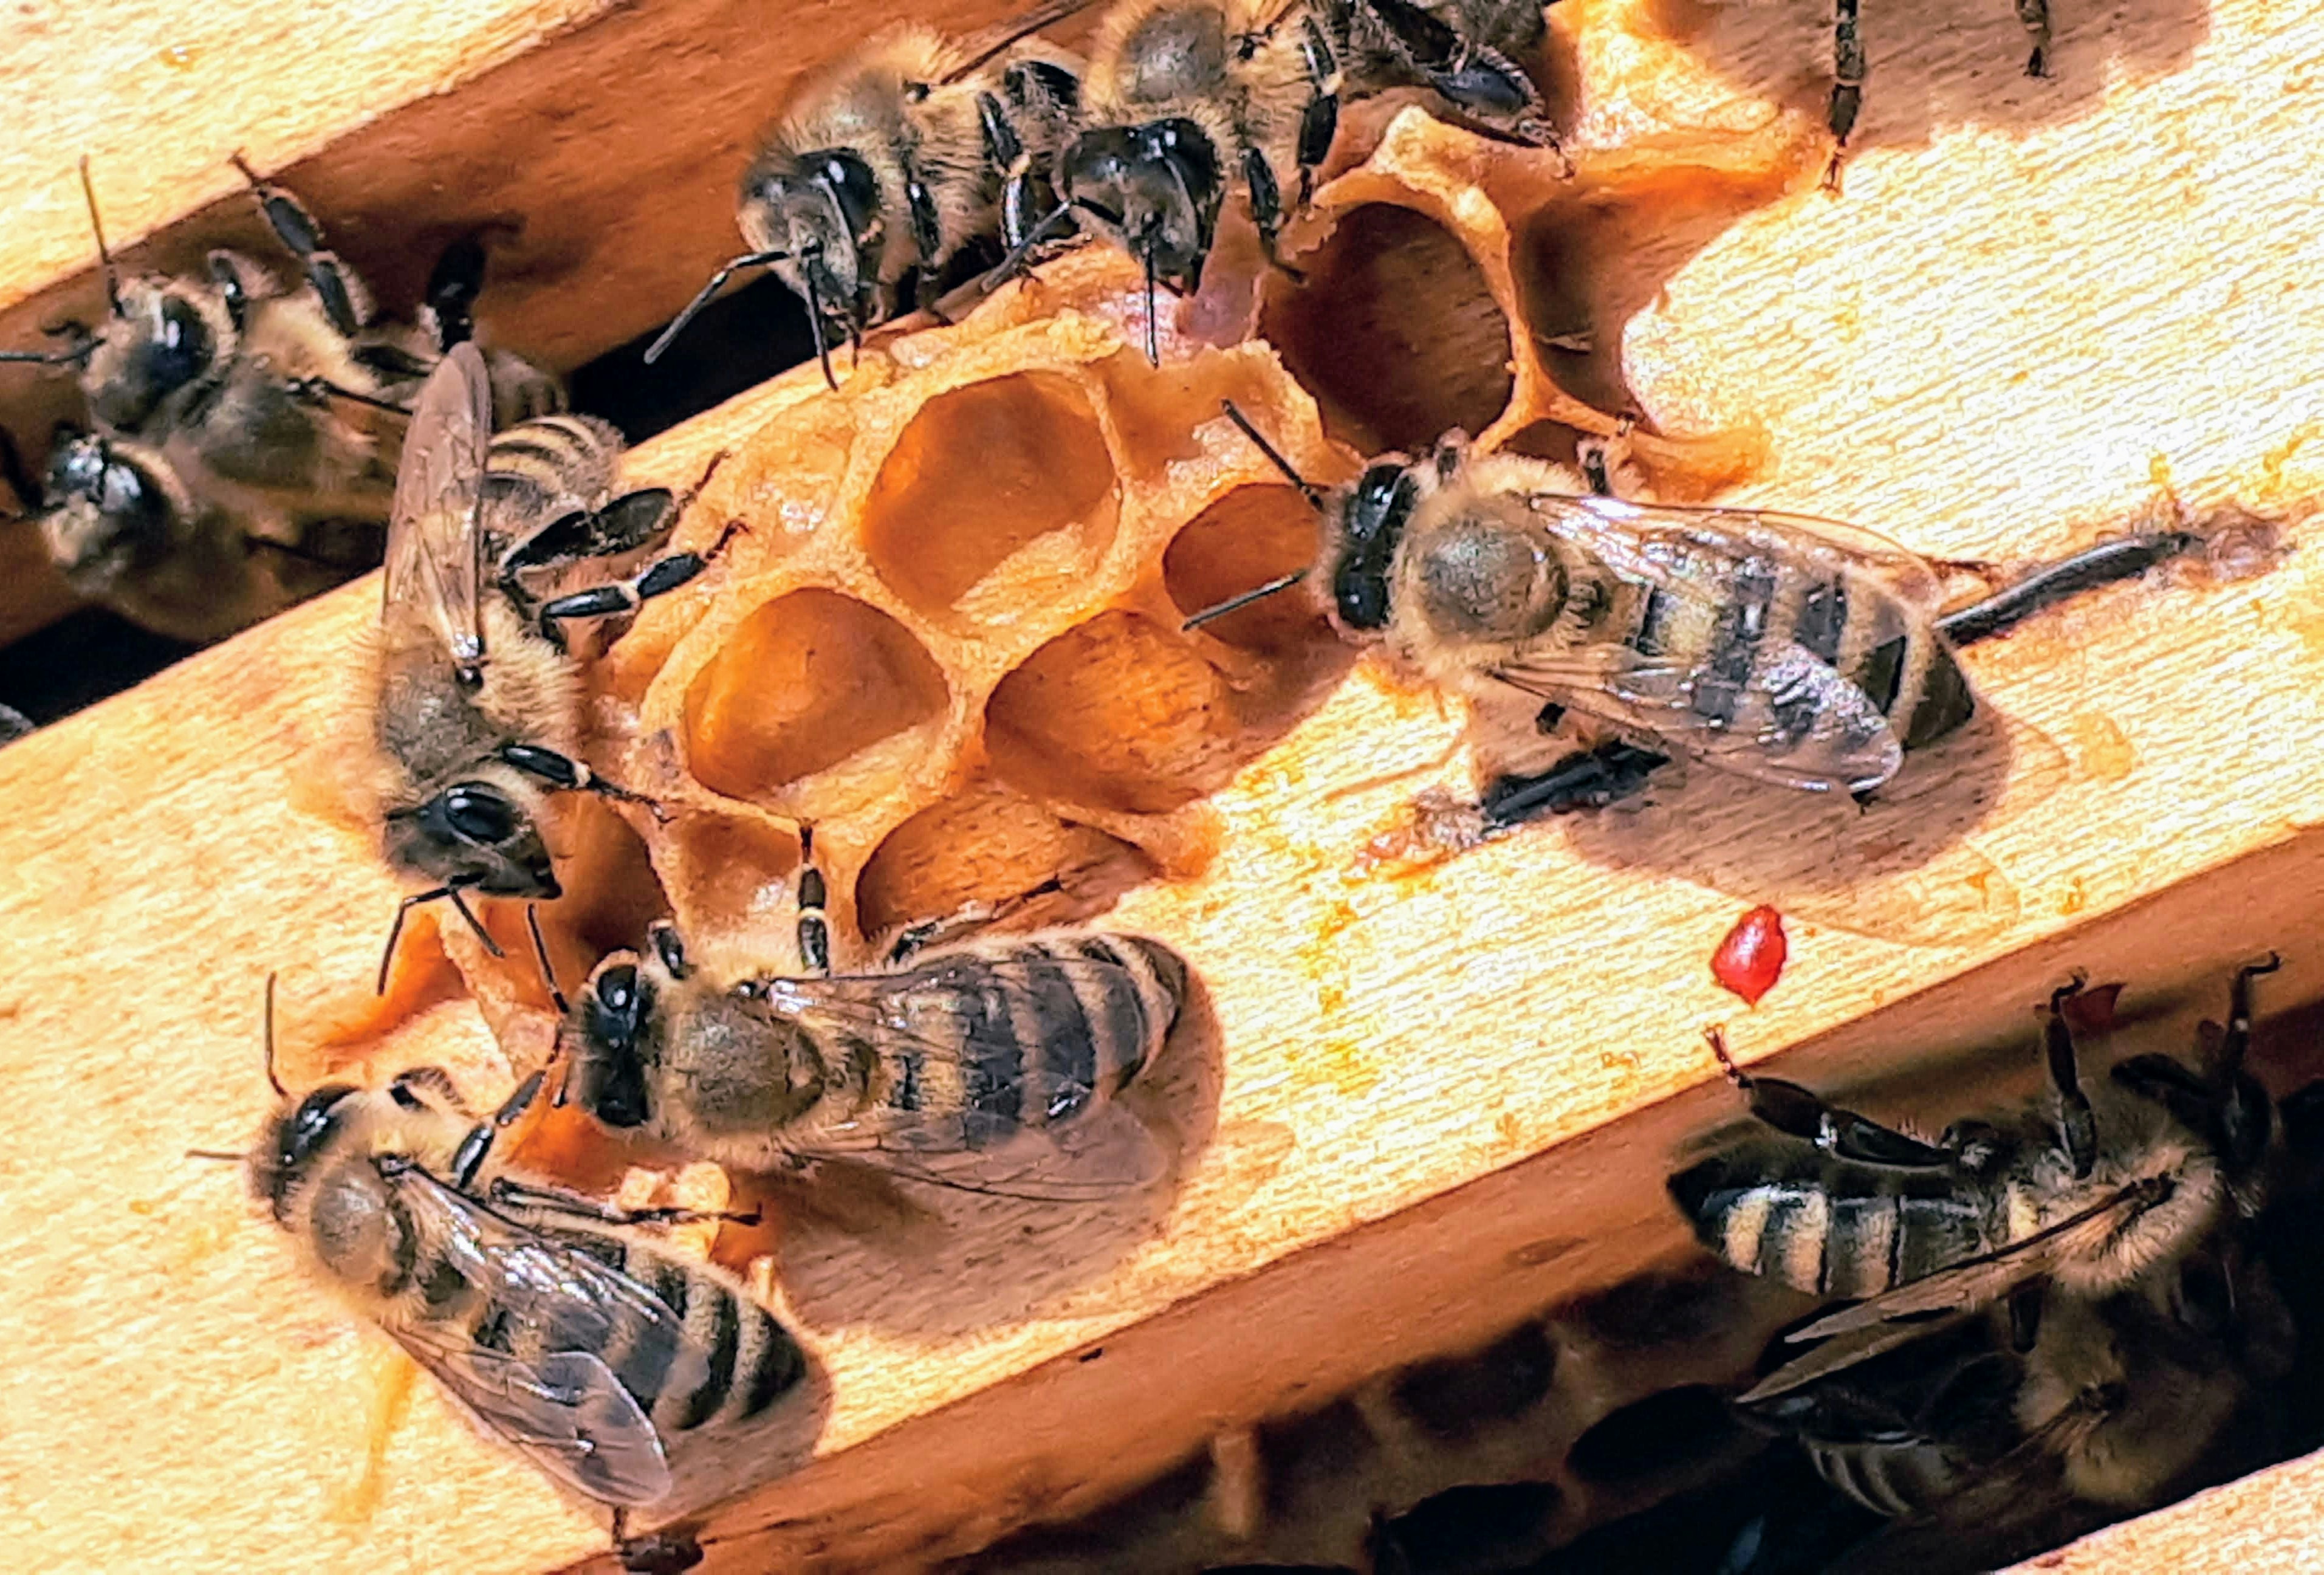 Honey bees on a hive frame collecting nectar and pollen with clear view of hexagonal wax cells